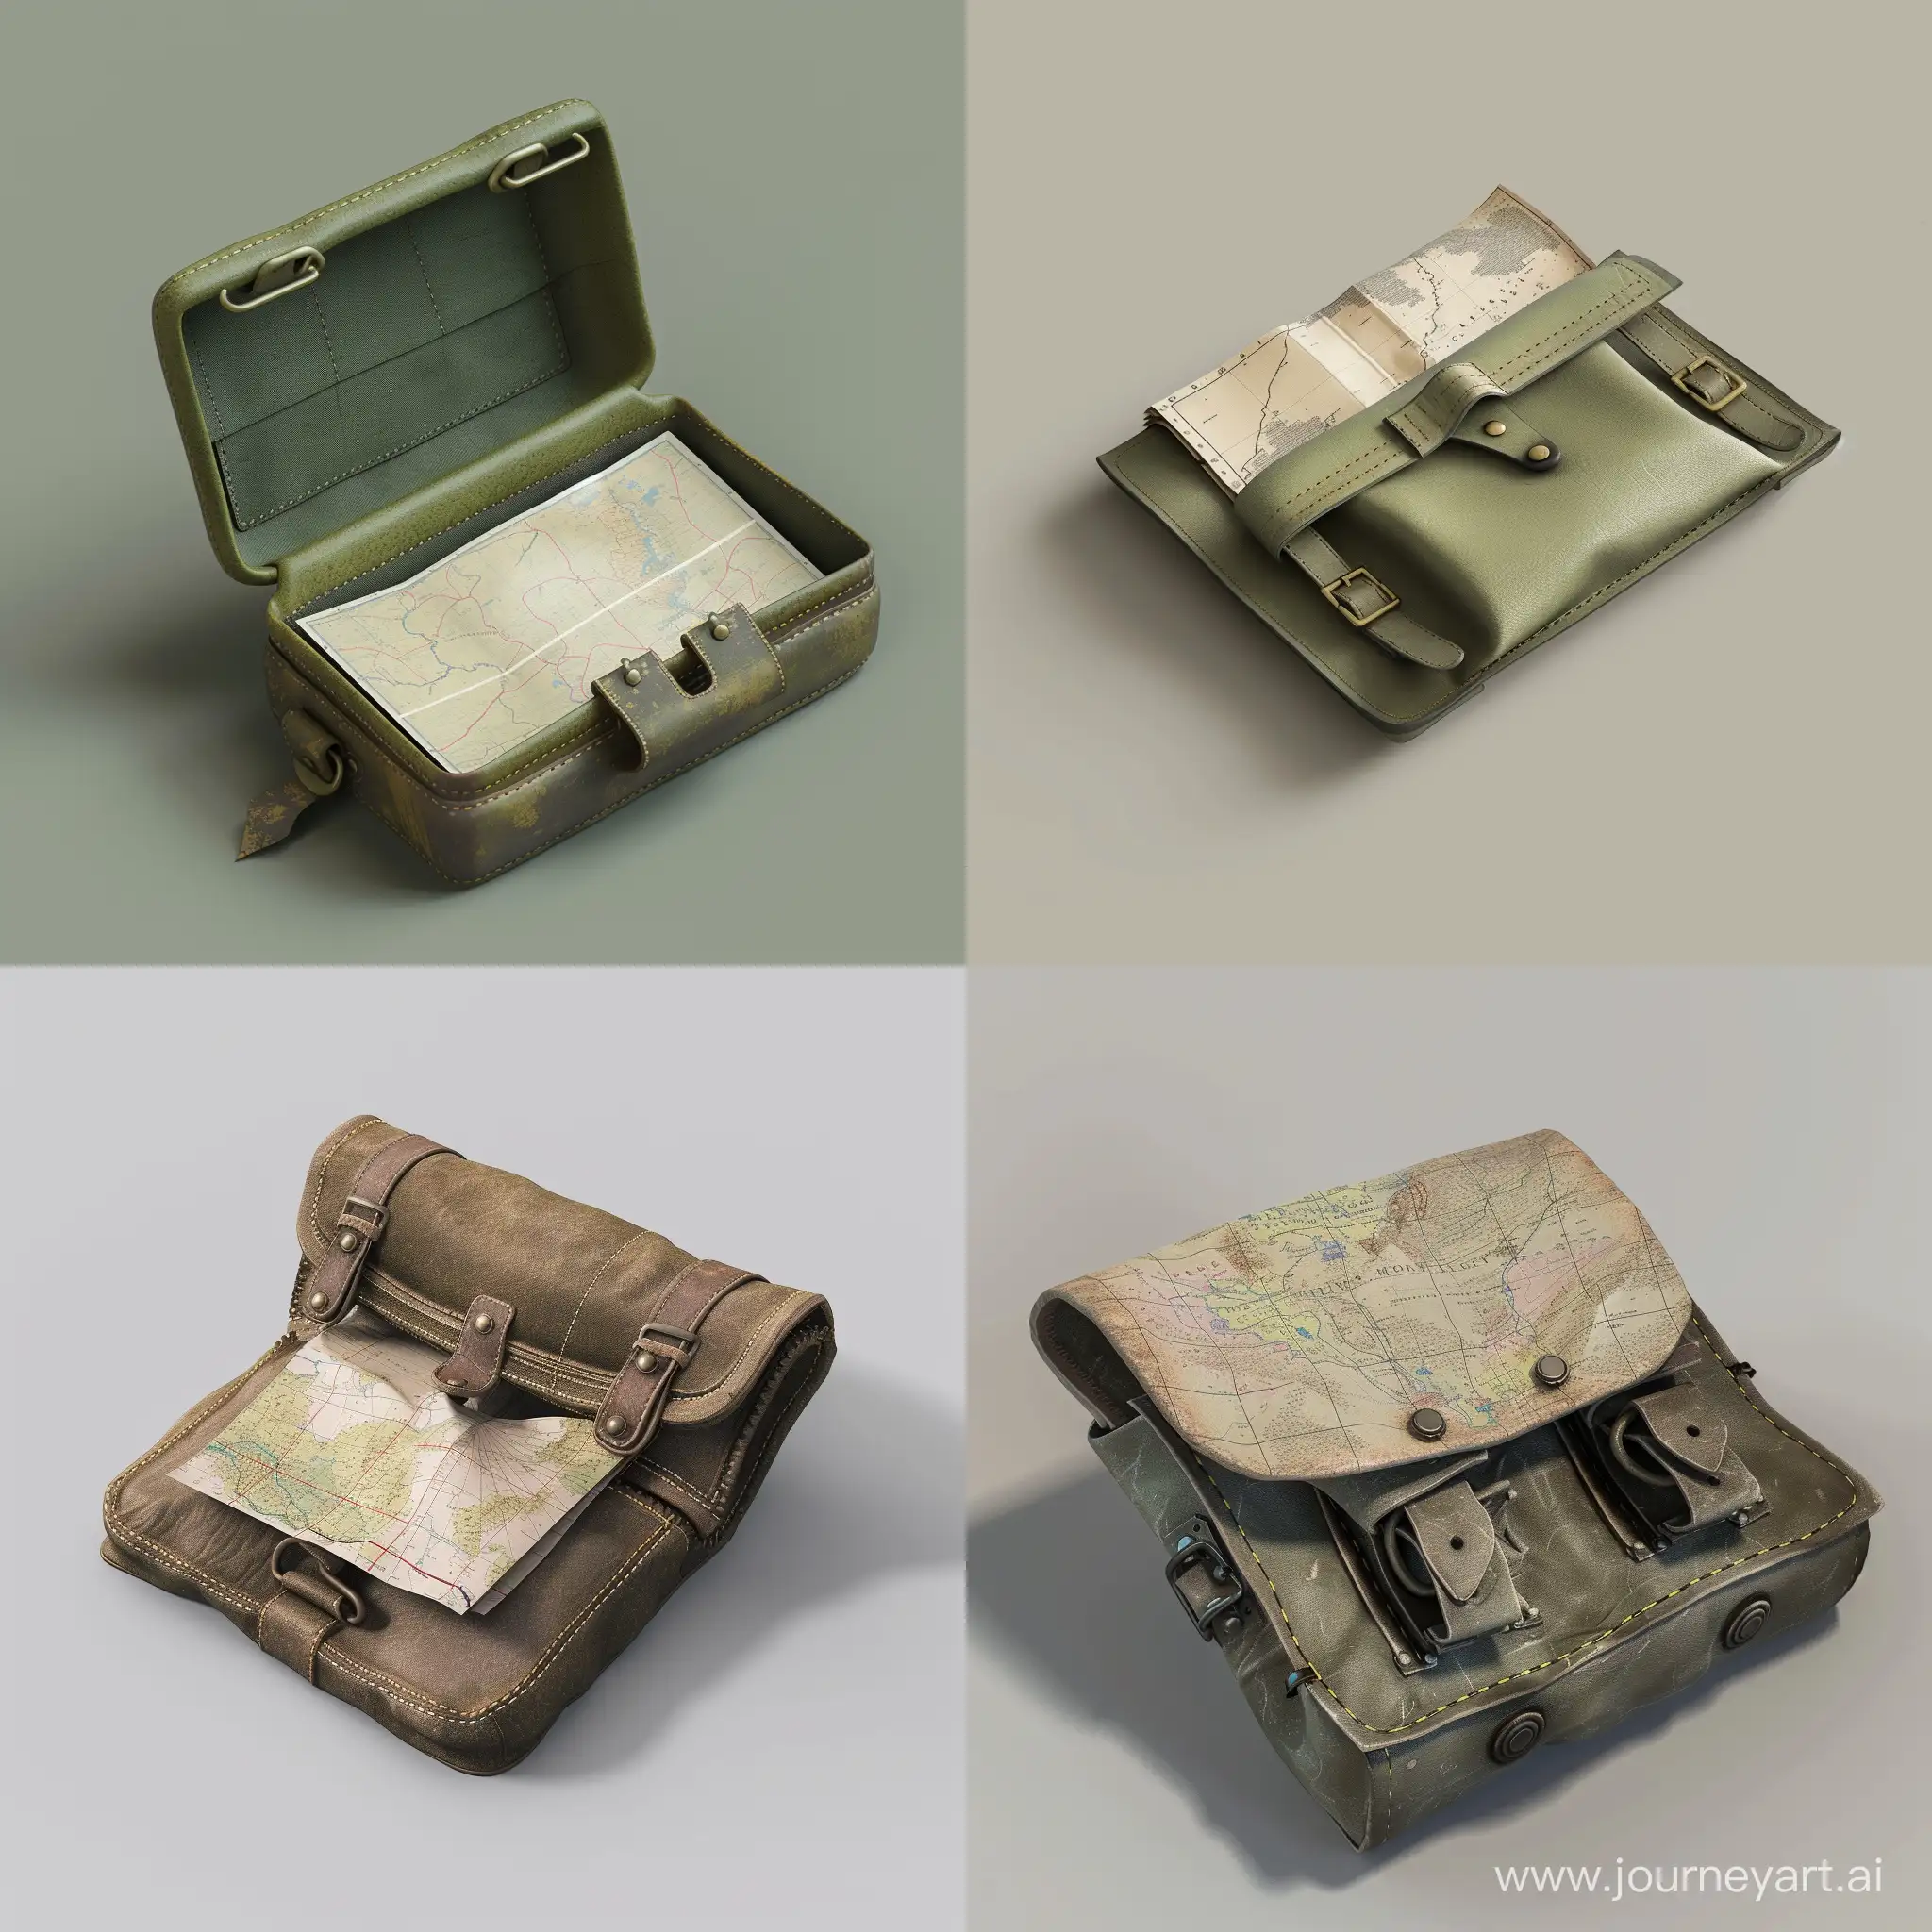 Isometric-Military-Mapping-Kit-in-Leather-Pouch-Realistic-3D-Render